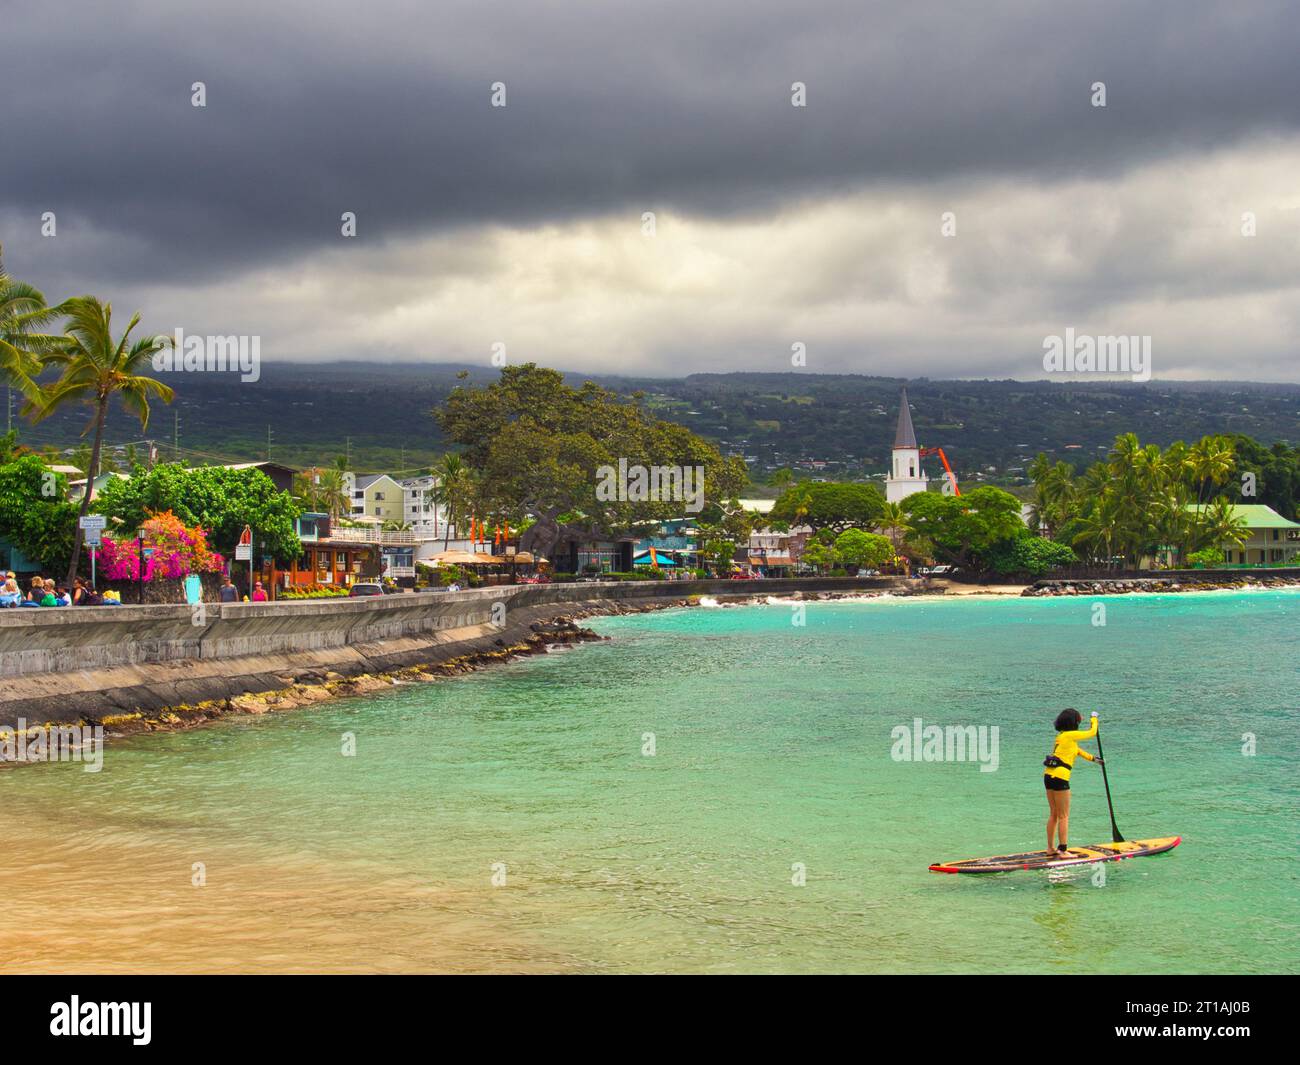 Beach and ocean view of downtown Kailua-Kona, Hawaii on the Big Island with stormy clouds and a paddle boarder in yellow wetsuit on very blue ocean. Stock Photo